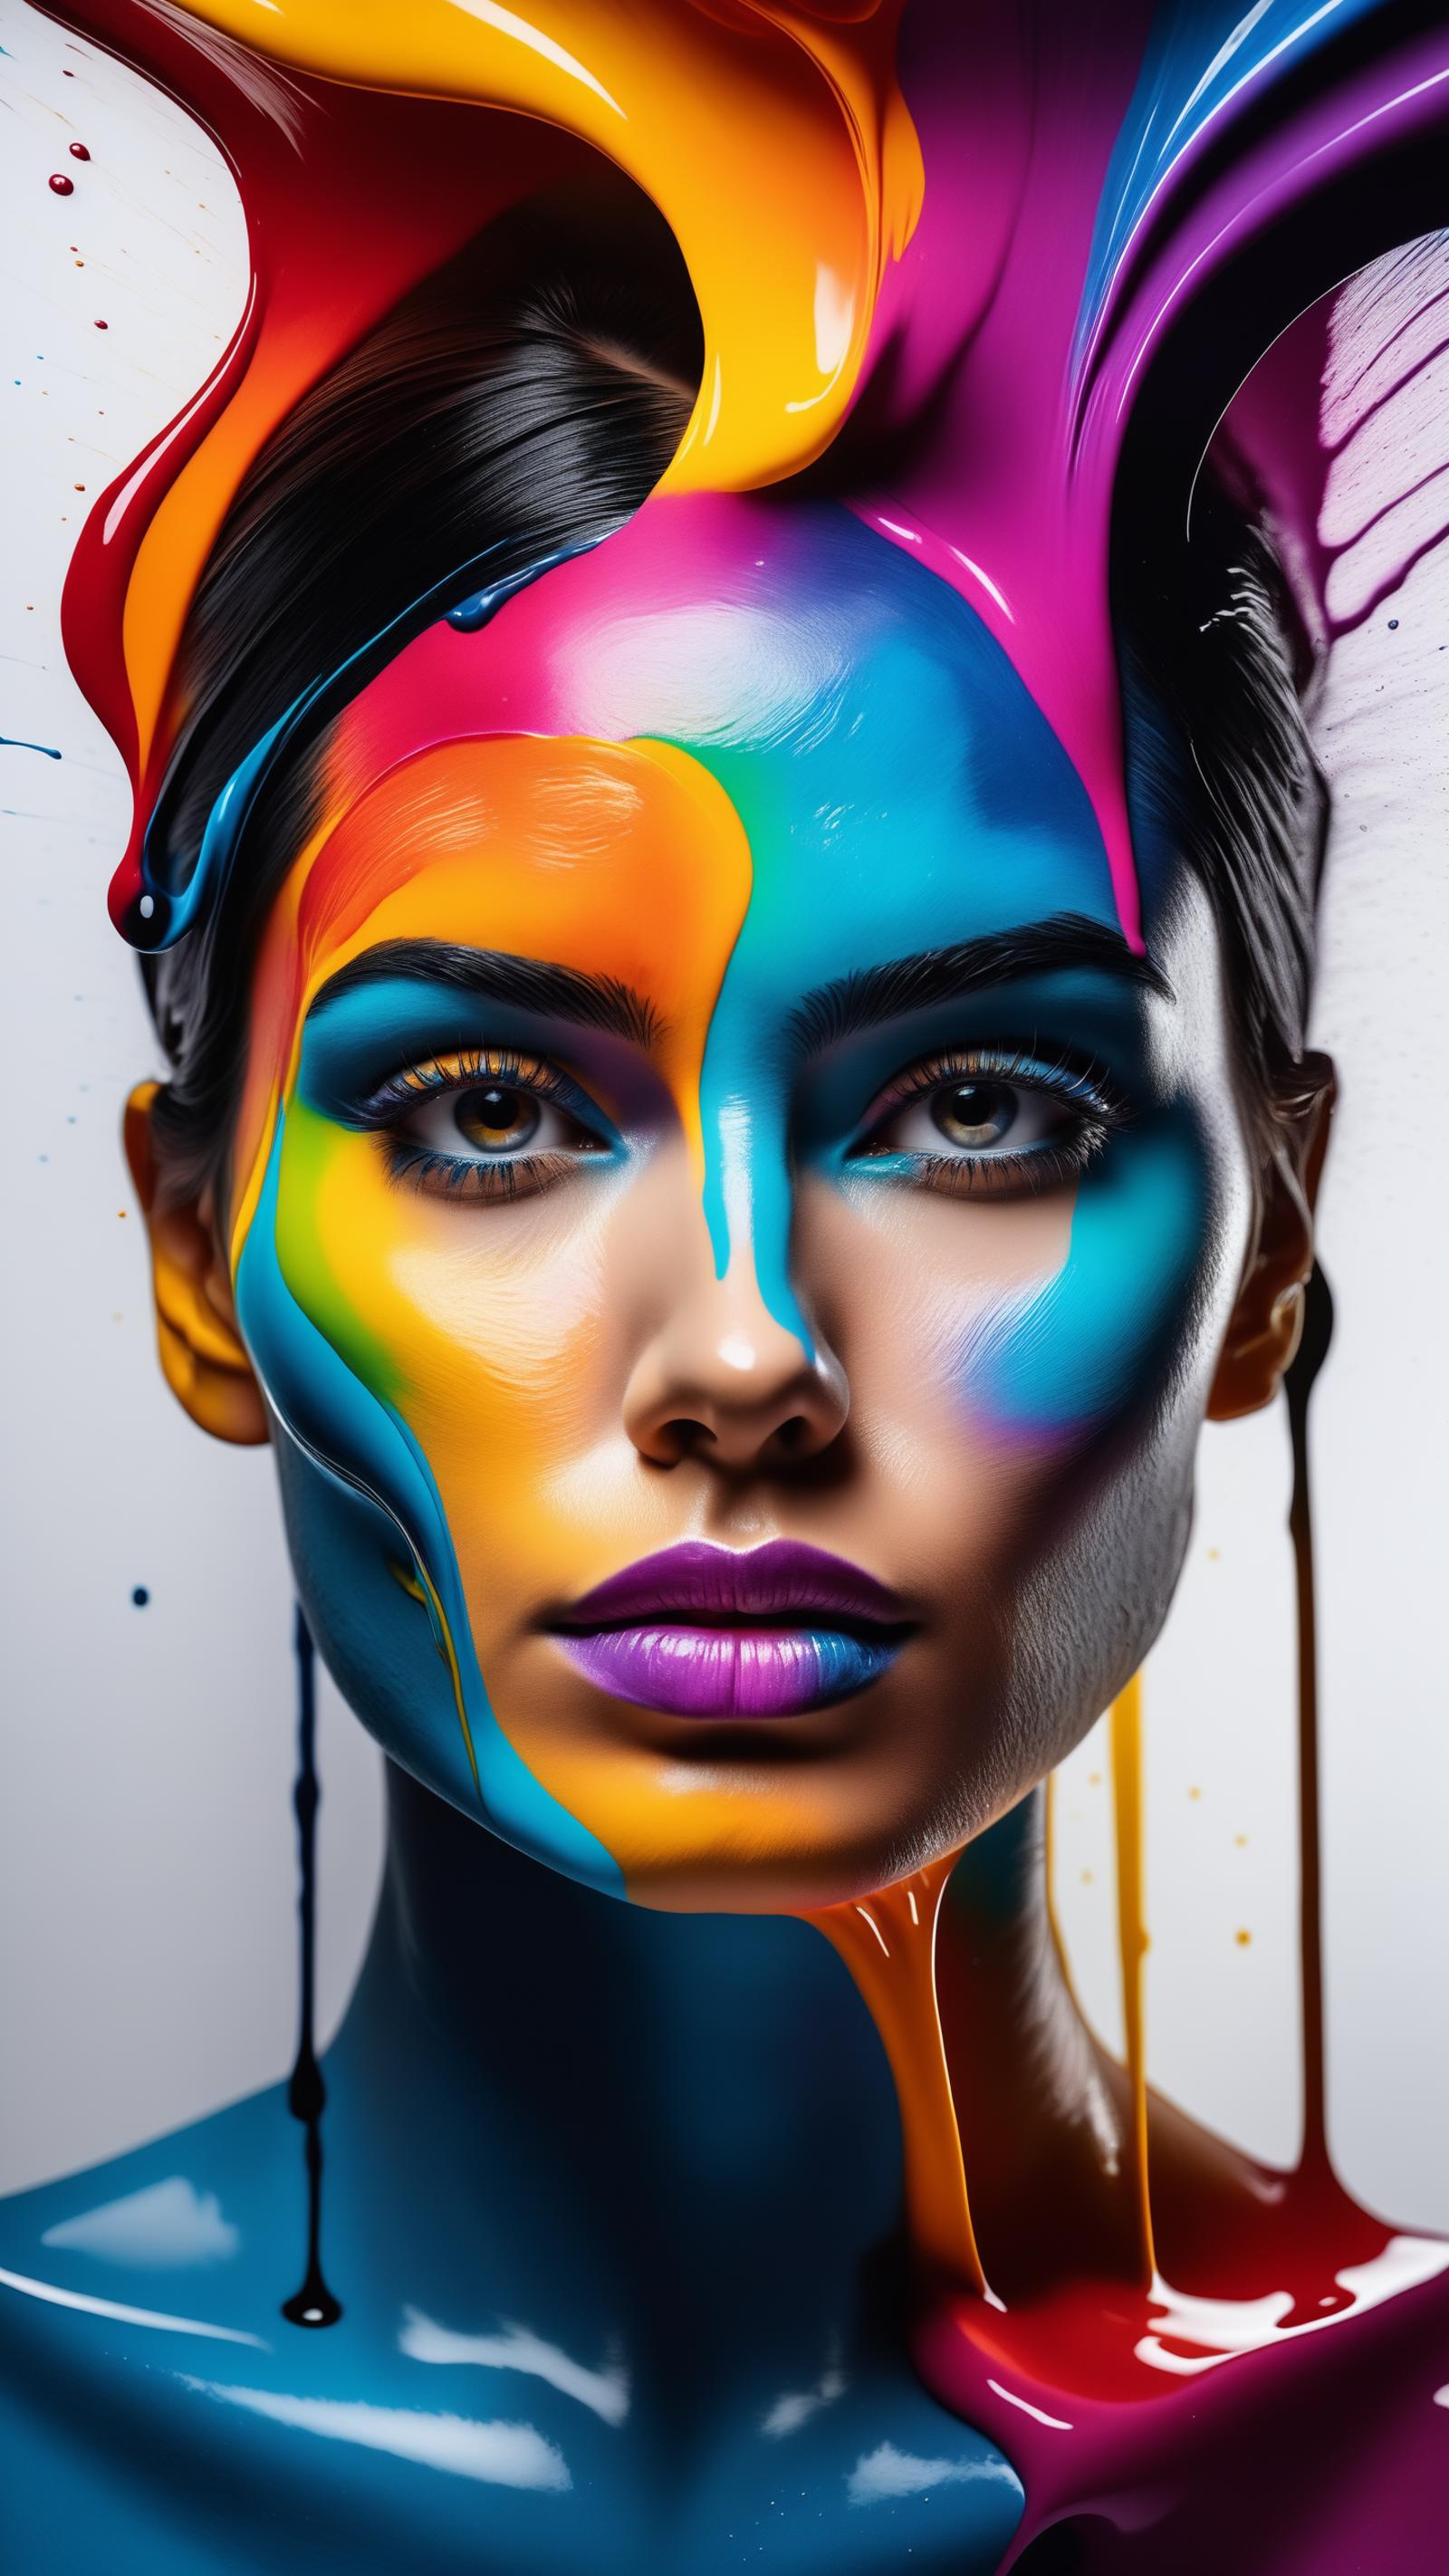 A vibrant, artistic portrait of a woman with colorful paint splatters on her face.